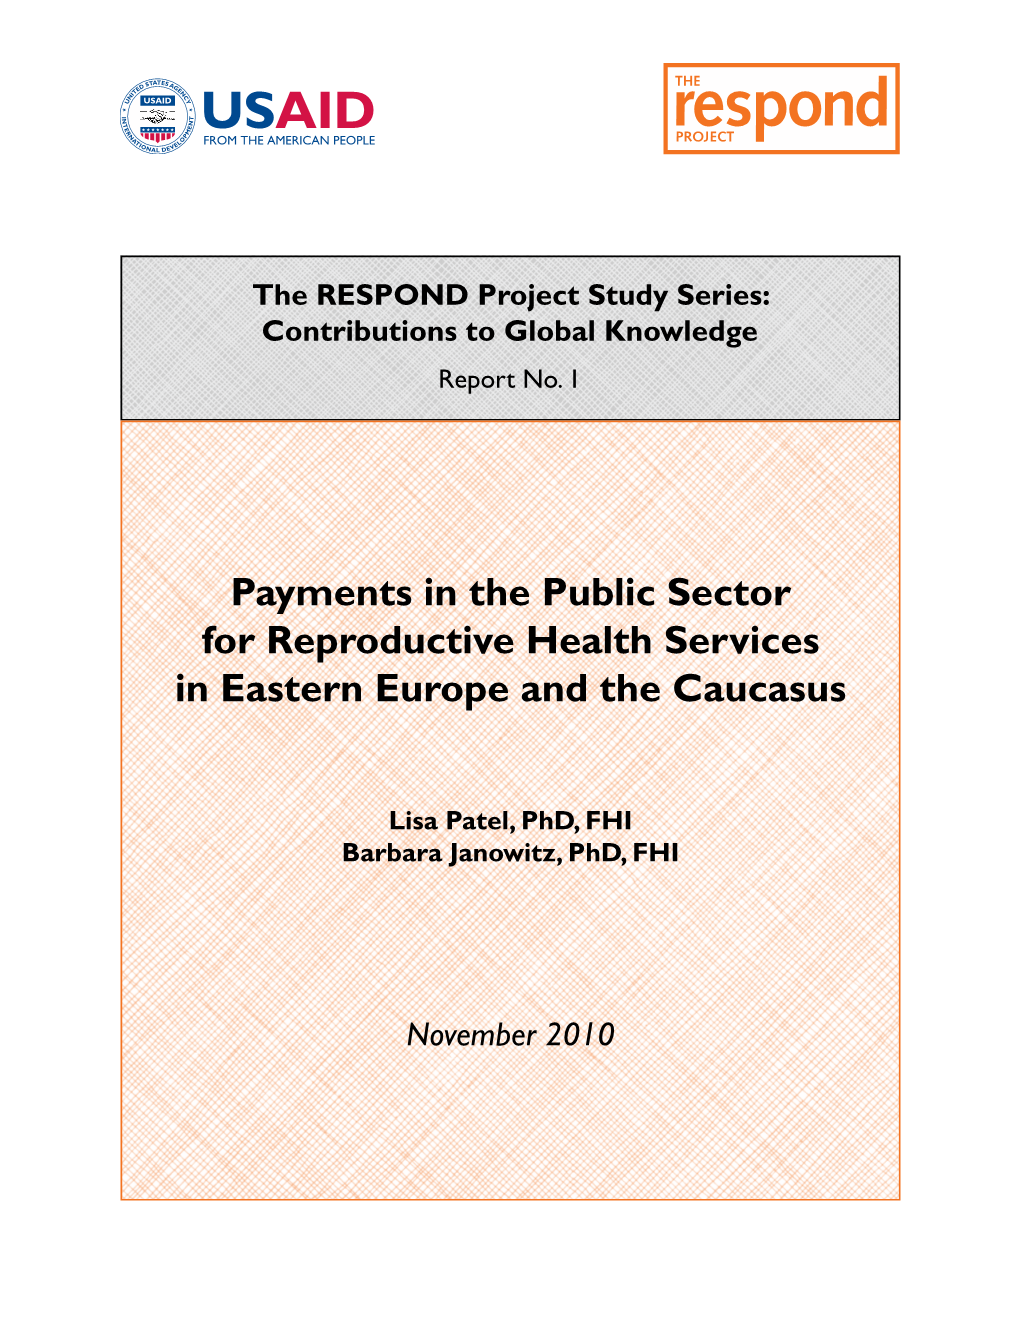 Payments in the Public Sector for Reproductive Health Services in Eastern Europe and the Caucasus